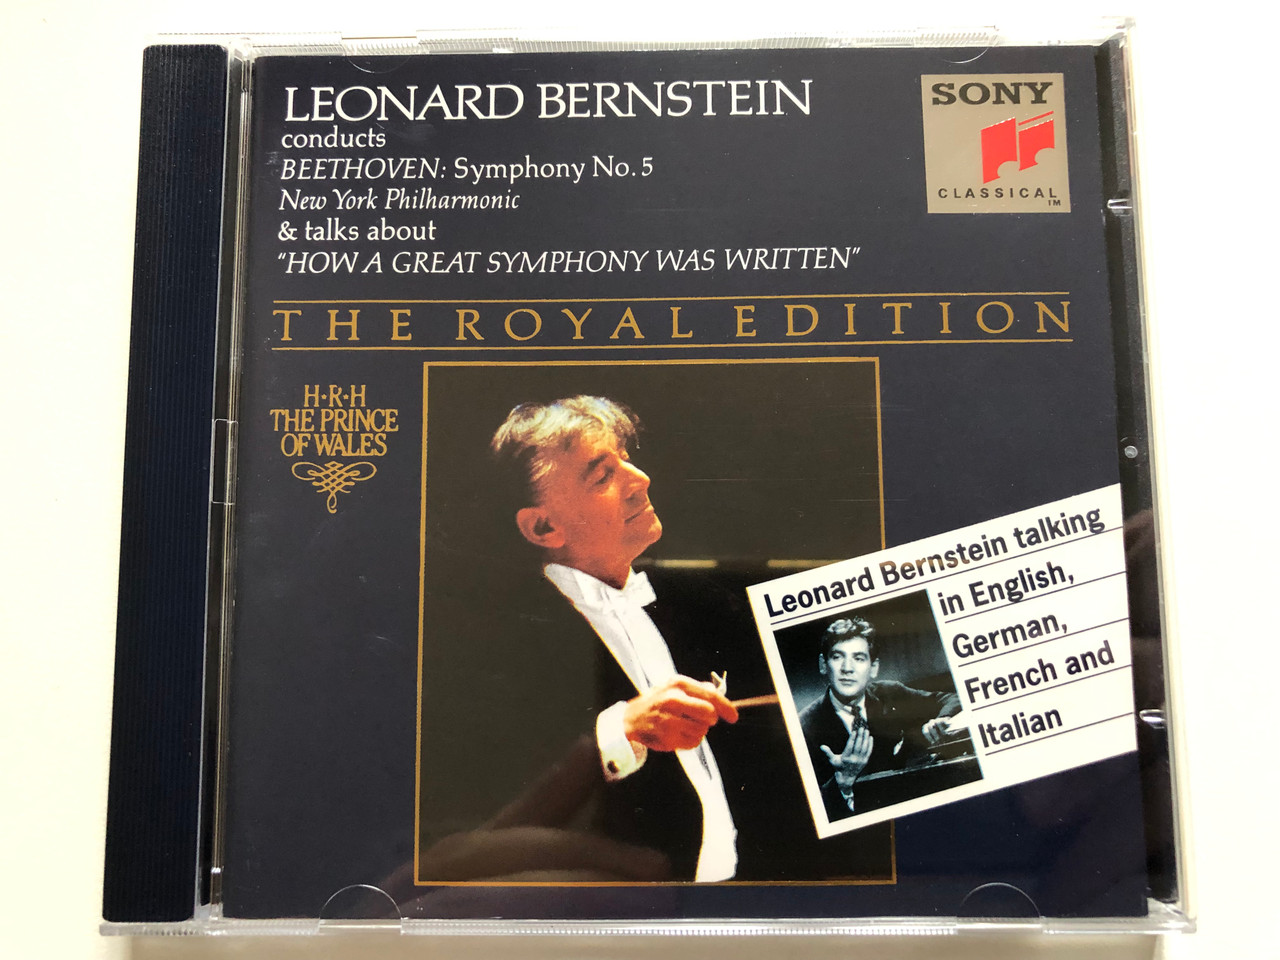 https://cdn10.bigcommerce.com/s-62bdpkt7pb/products/0/images/311011/Leonard_Bernstein_Conducts_Beethoven_Symphony_No._5_New_York_Philharmonic_Talks_About_How_A_Great_Symphony_Was_Written_The_Royal_Edition_Sony_Classical_Audio_CD_1992_SXK_47645_1__21065.1699467255.1280.1280.JPG?c=2